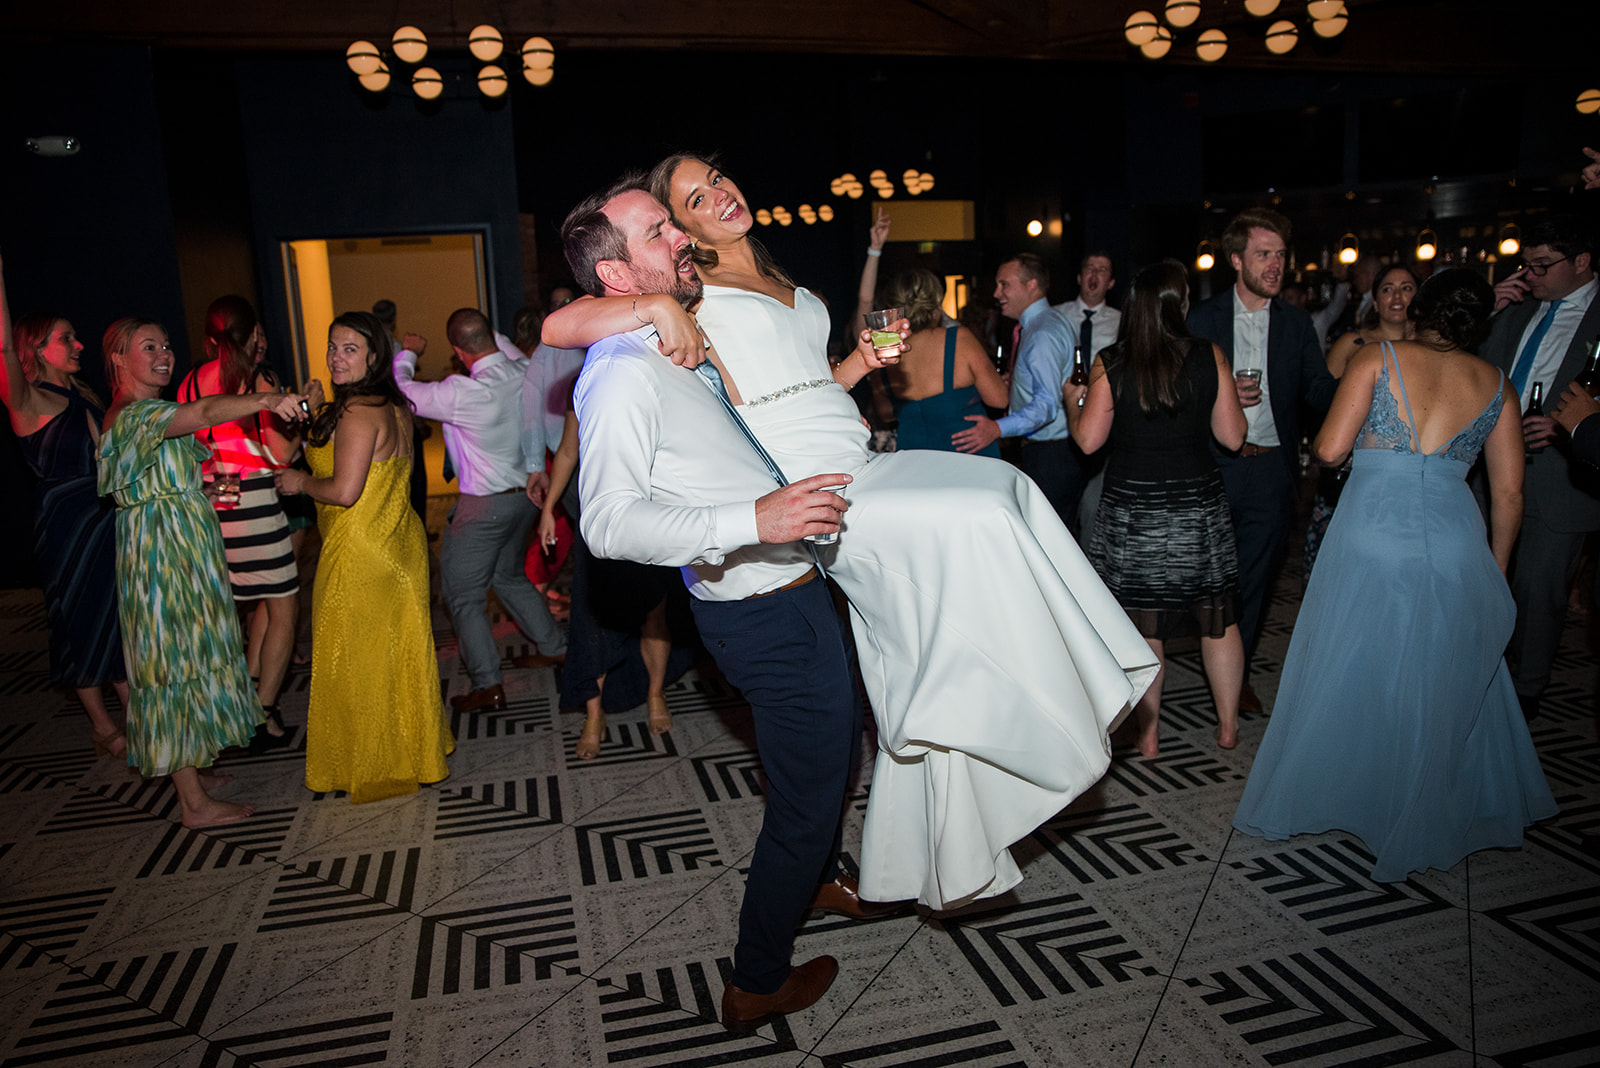 Groom lifts bride up and spins her around at their wedding reception.